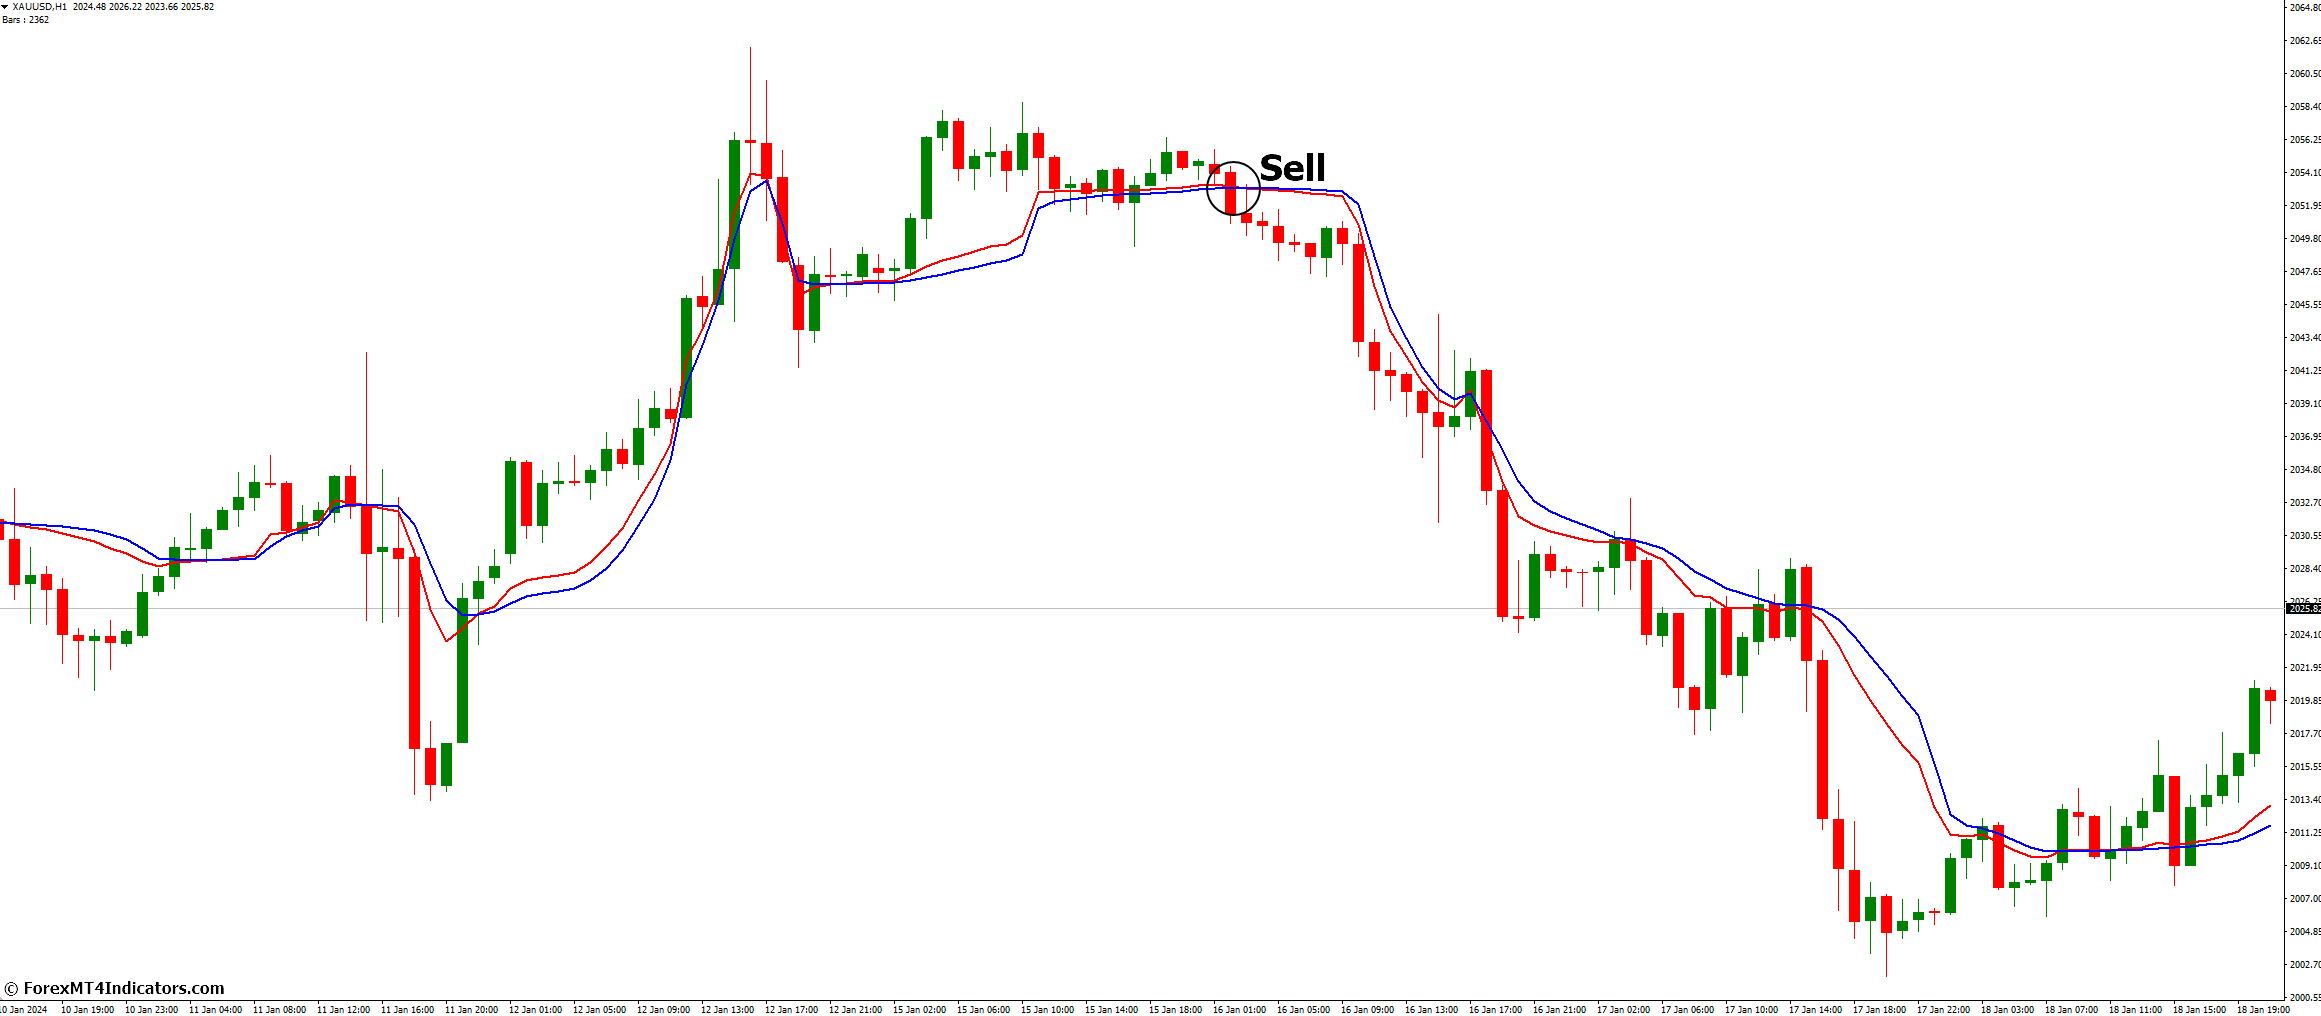 How to Trade with Fractal Adaptive Moving Average Indicator - Sell Entry